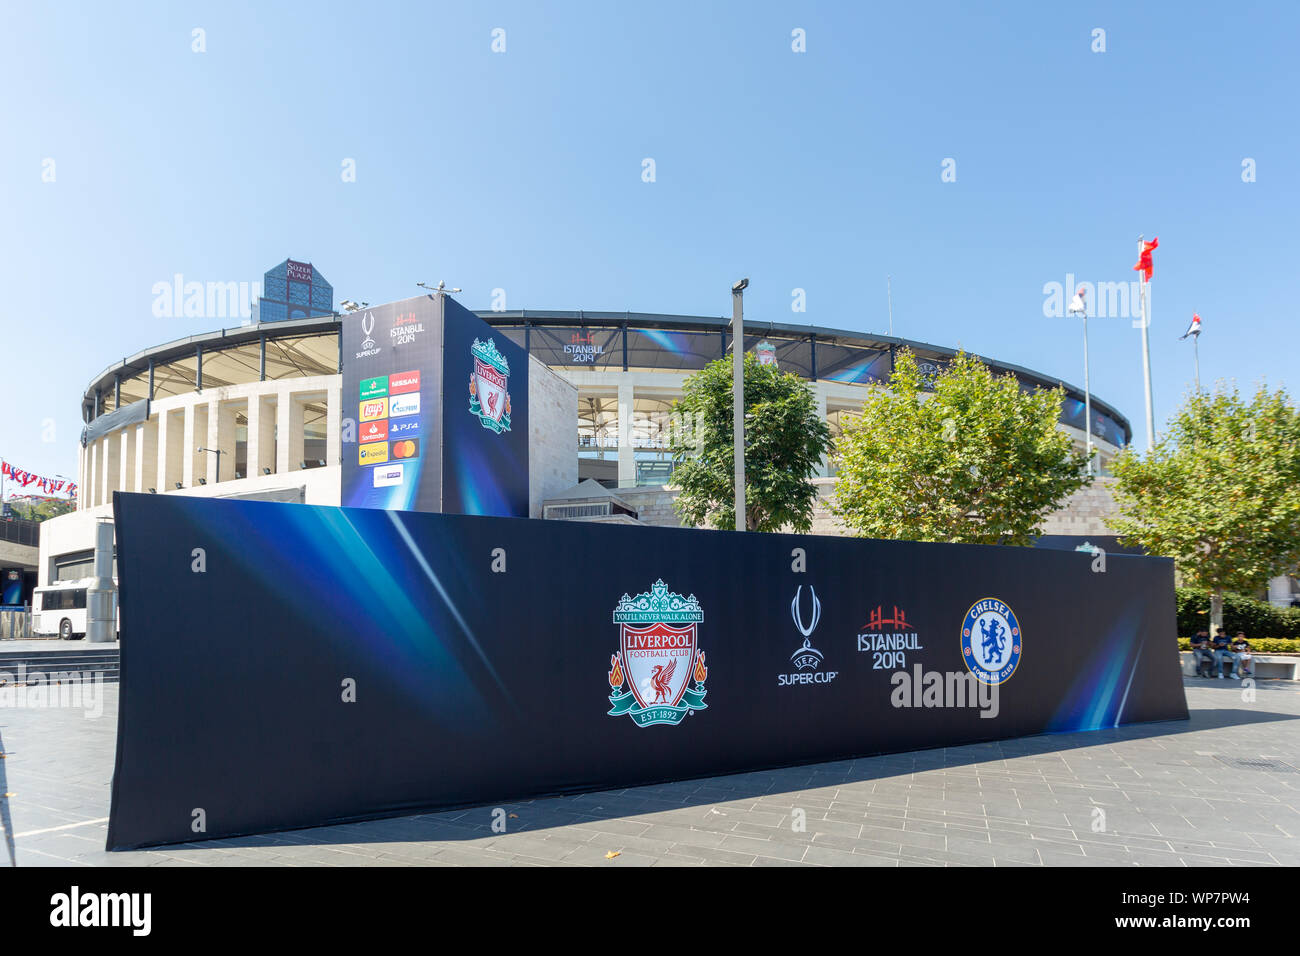 Press shooting board for Chelsea and Liverpool Football Clubs, Uefa Super Cup Final 2019 contestants, in front of the BJK Vodafone Park Stadium. Stock Photo